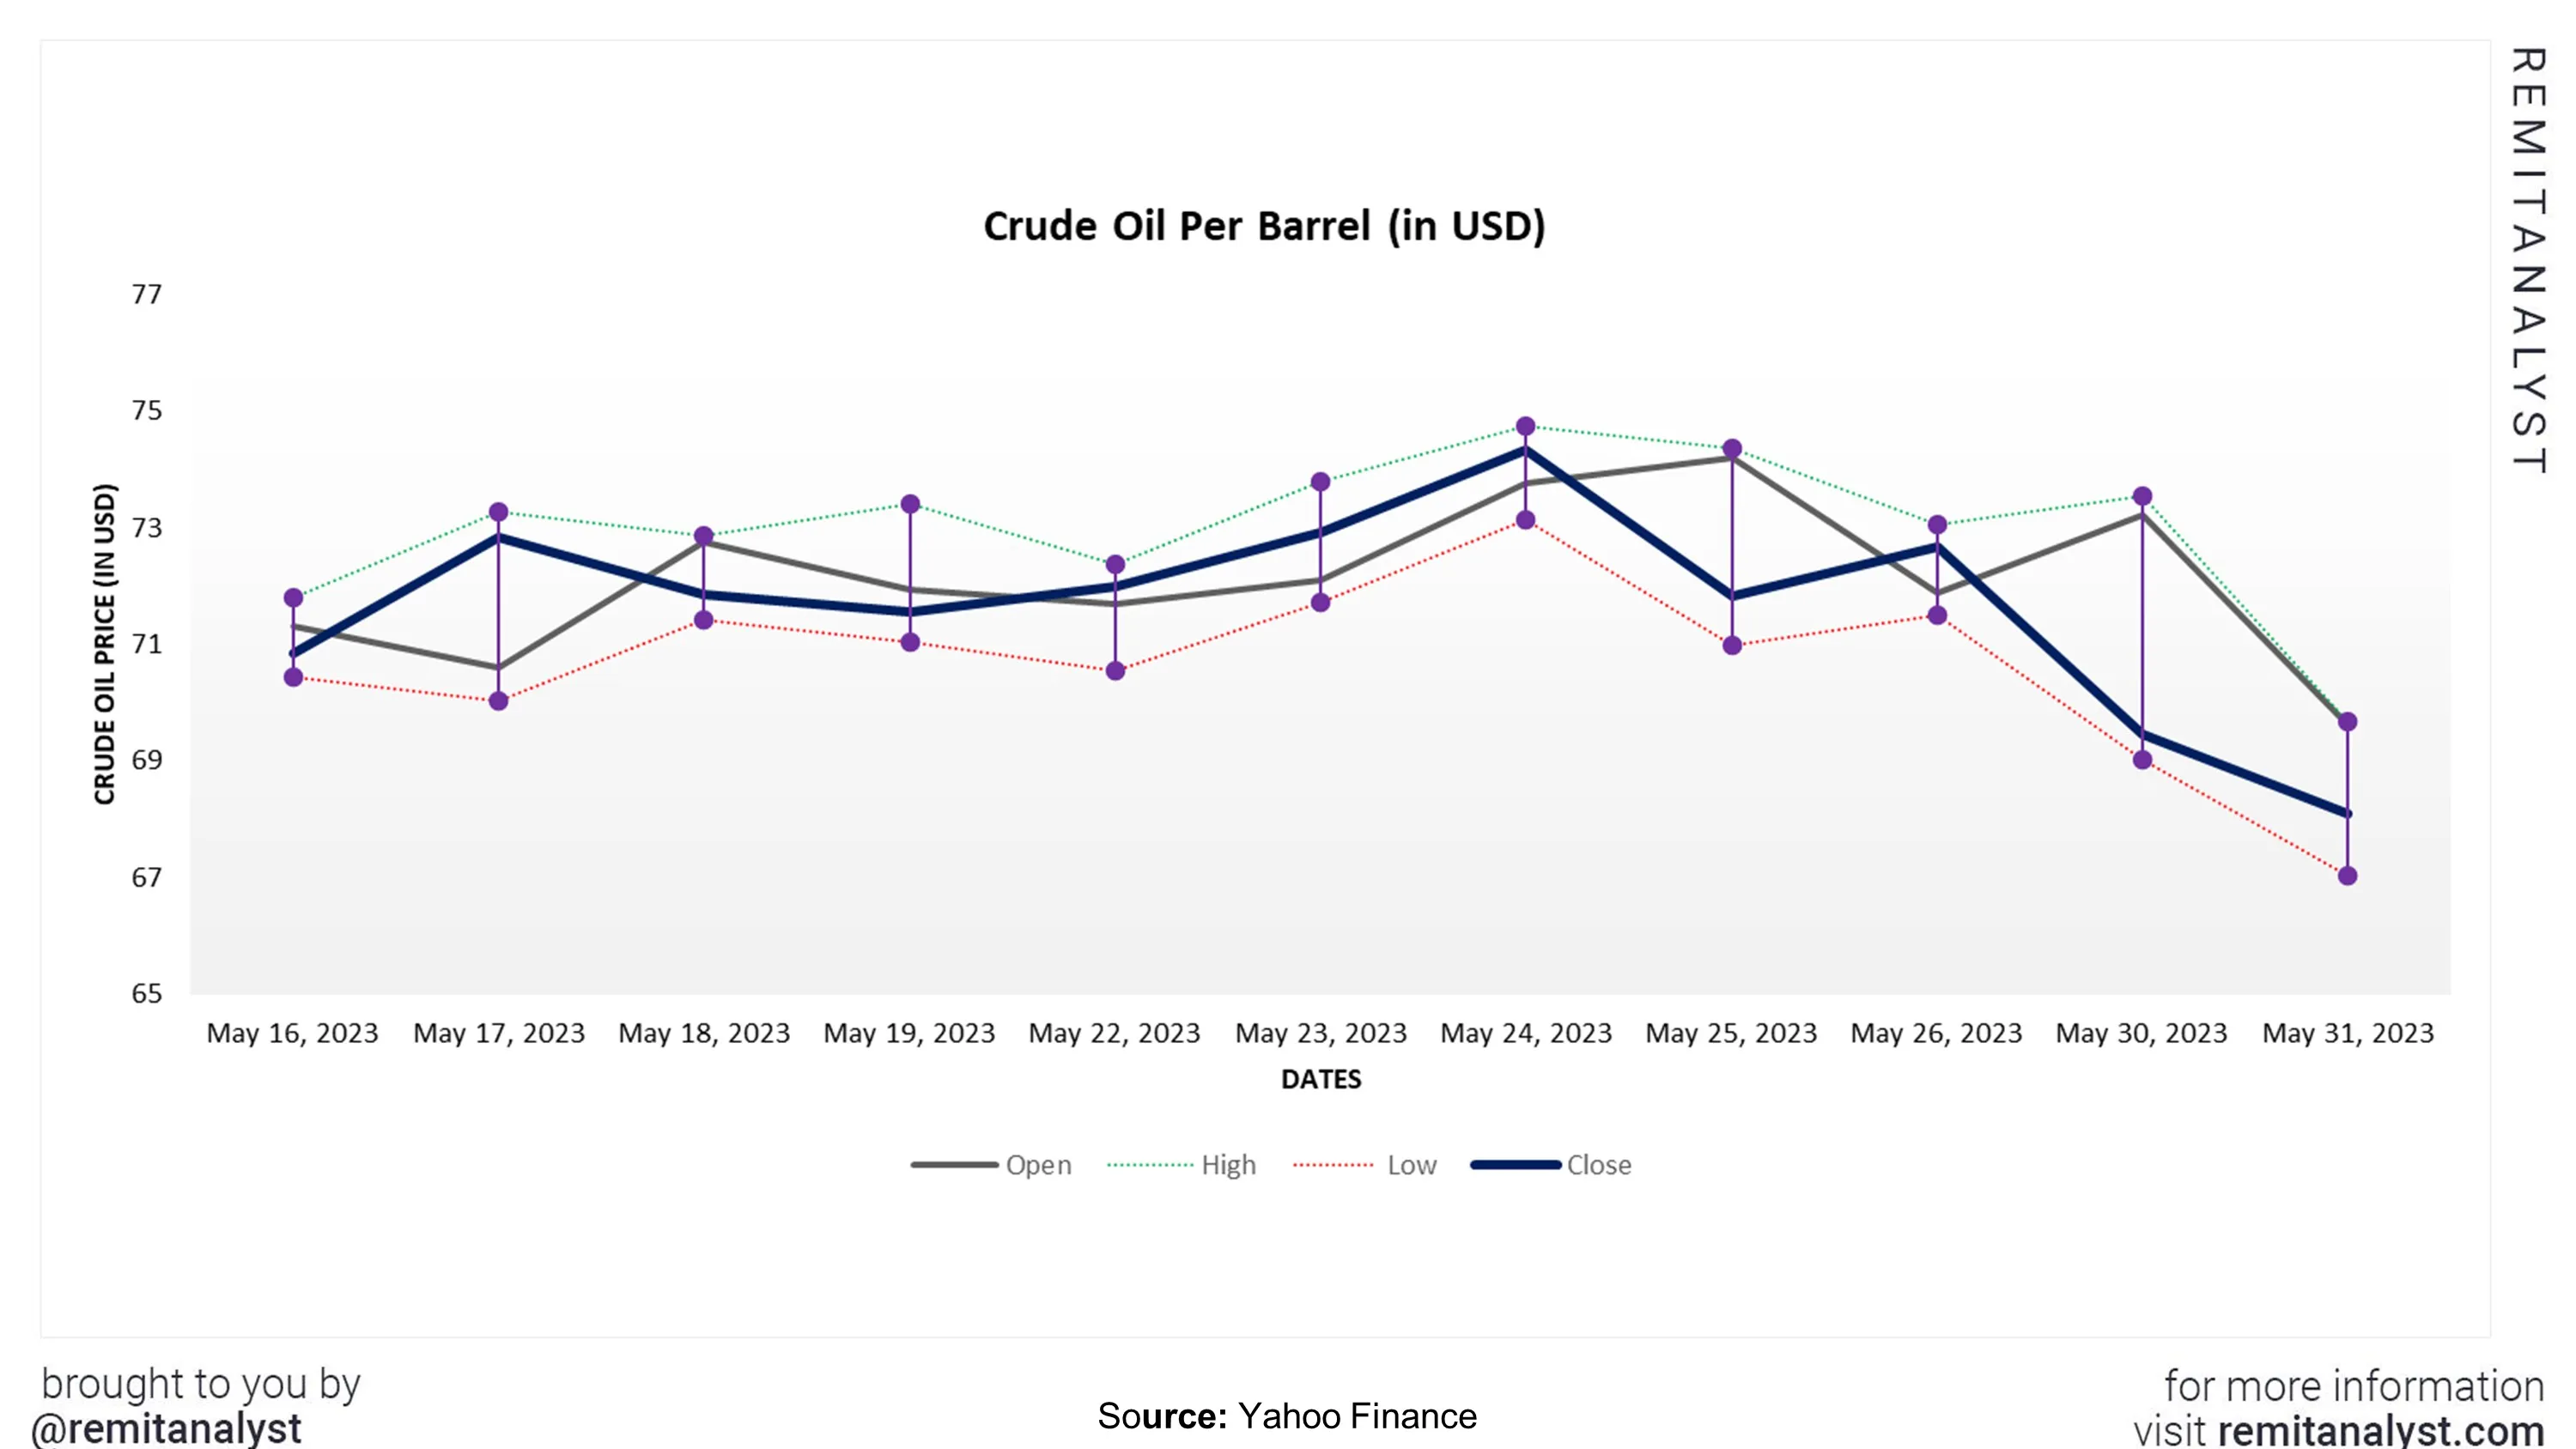 crude-oil-prices-from-16-may-2023-to-30-may-2023